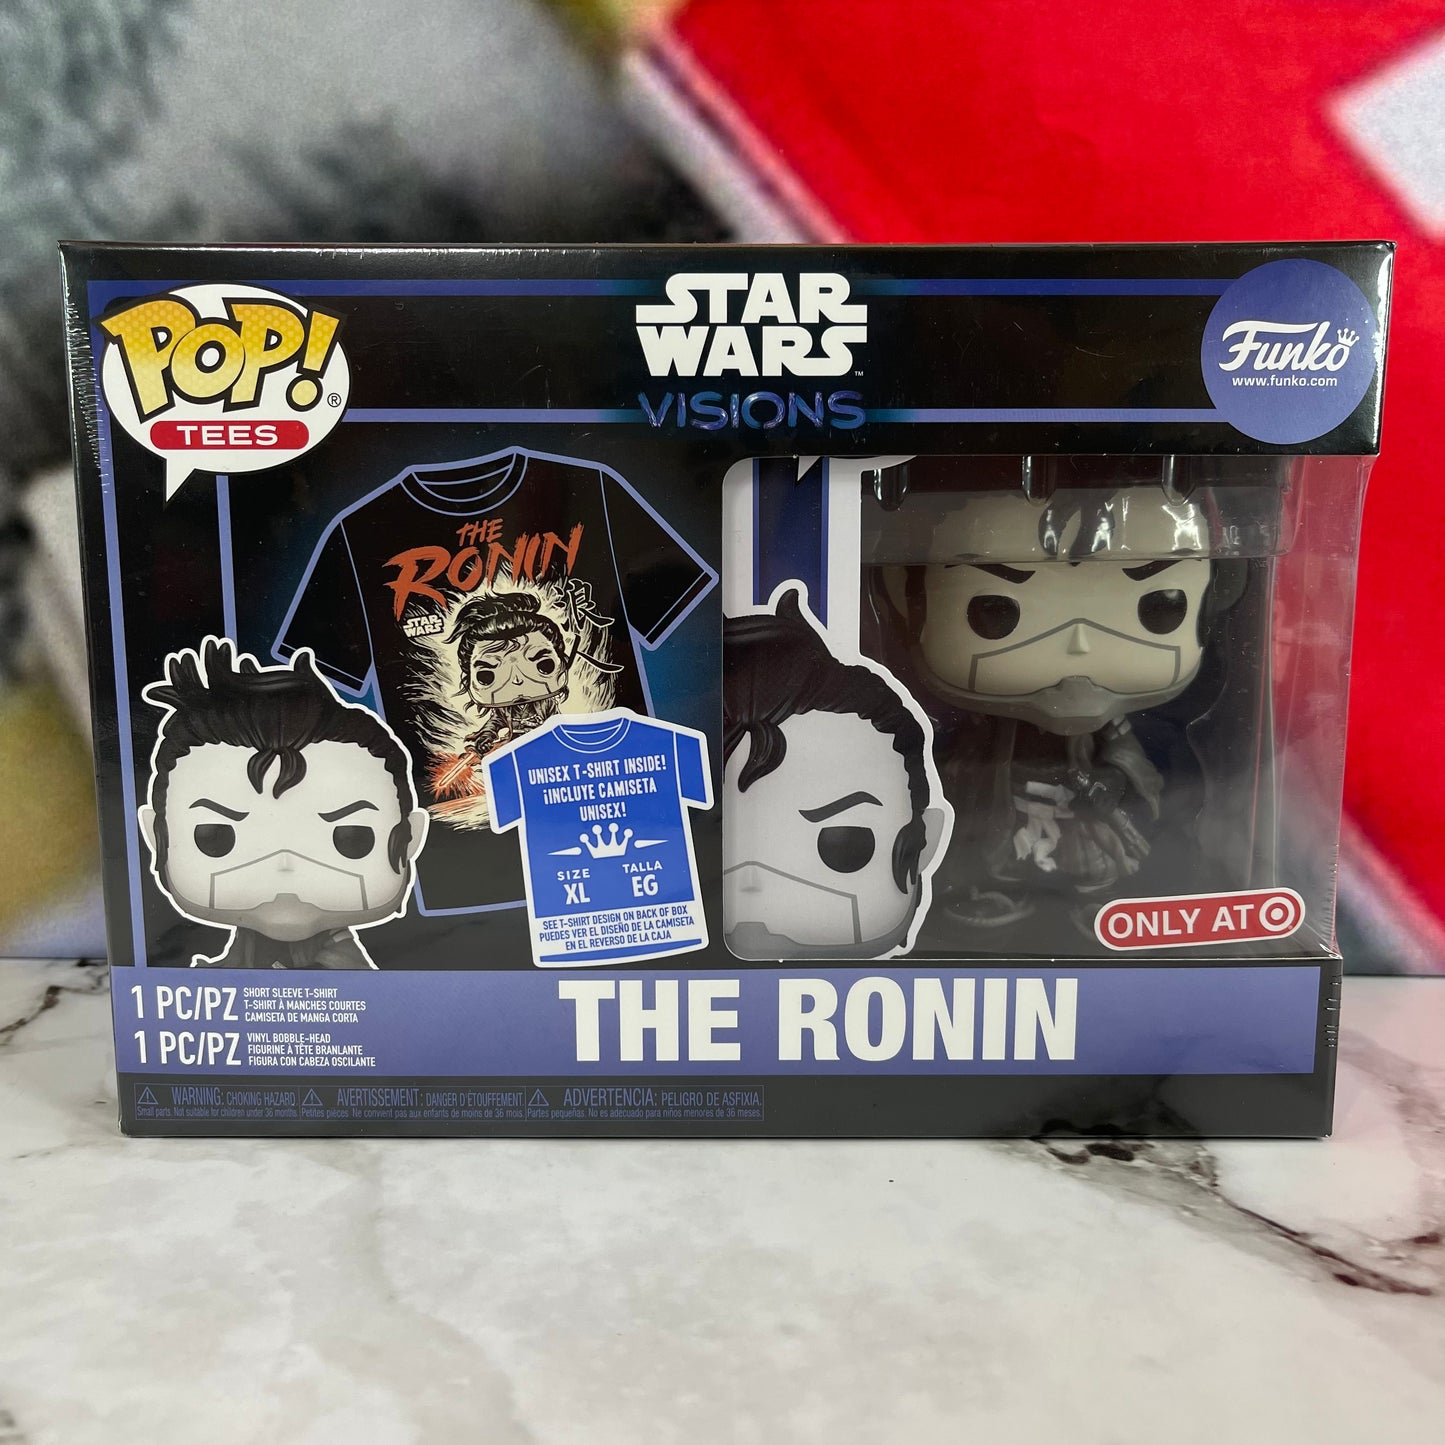 Funko Pop! Star Wars Visions The Ronin Pop & T-Shirt Target Exclusive